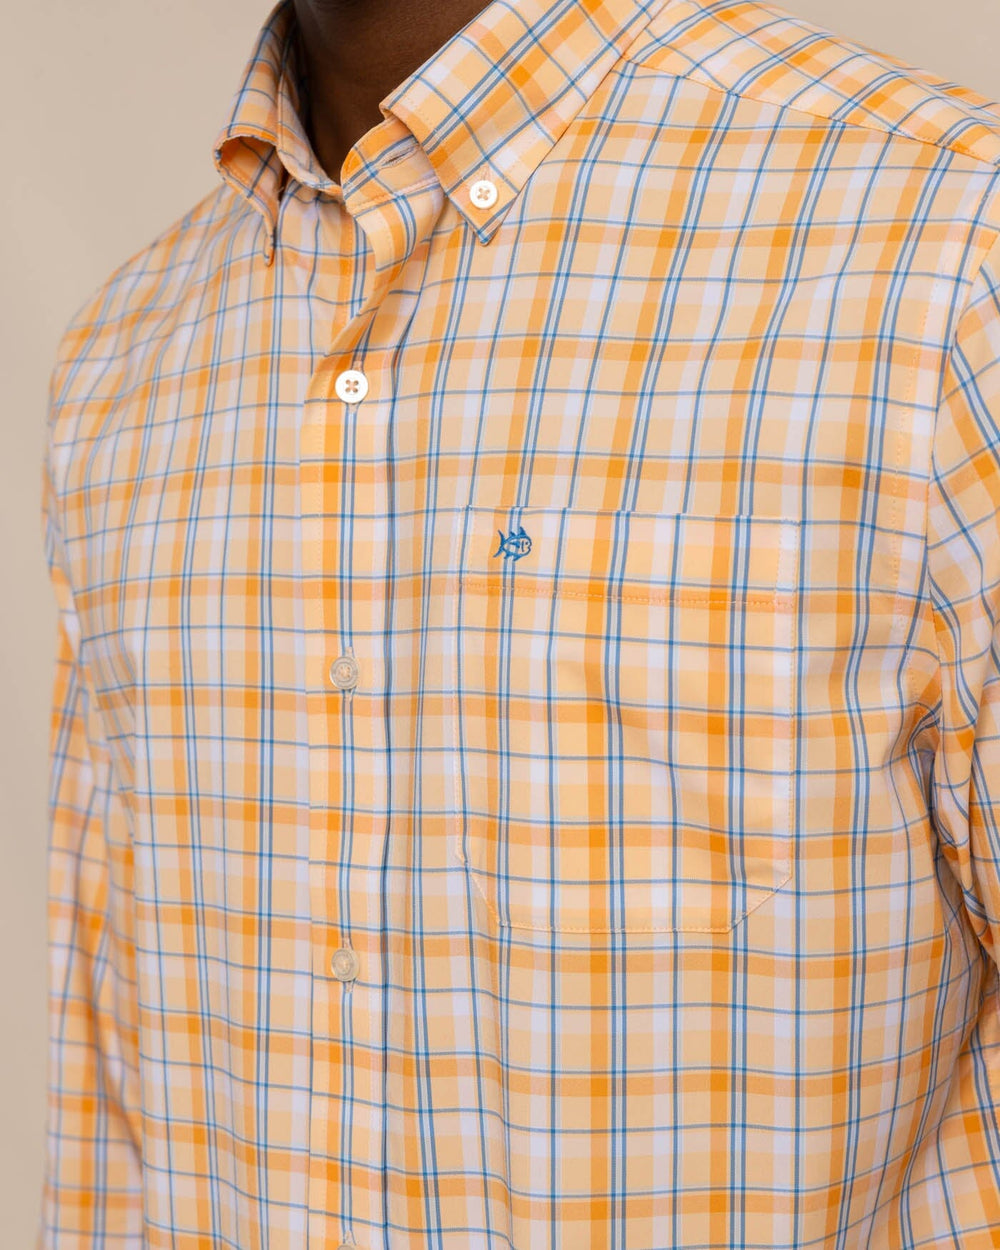 The detail view of the Southern Tide brrr Whalehead Plaid Intercoastal Sport Shirt by Southern Tide - Horizon